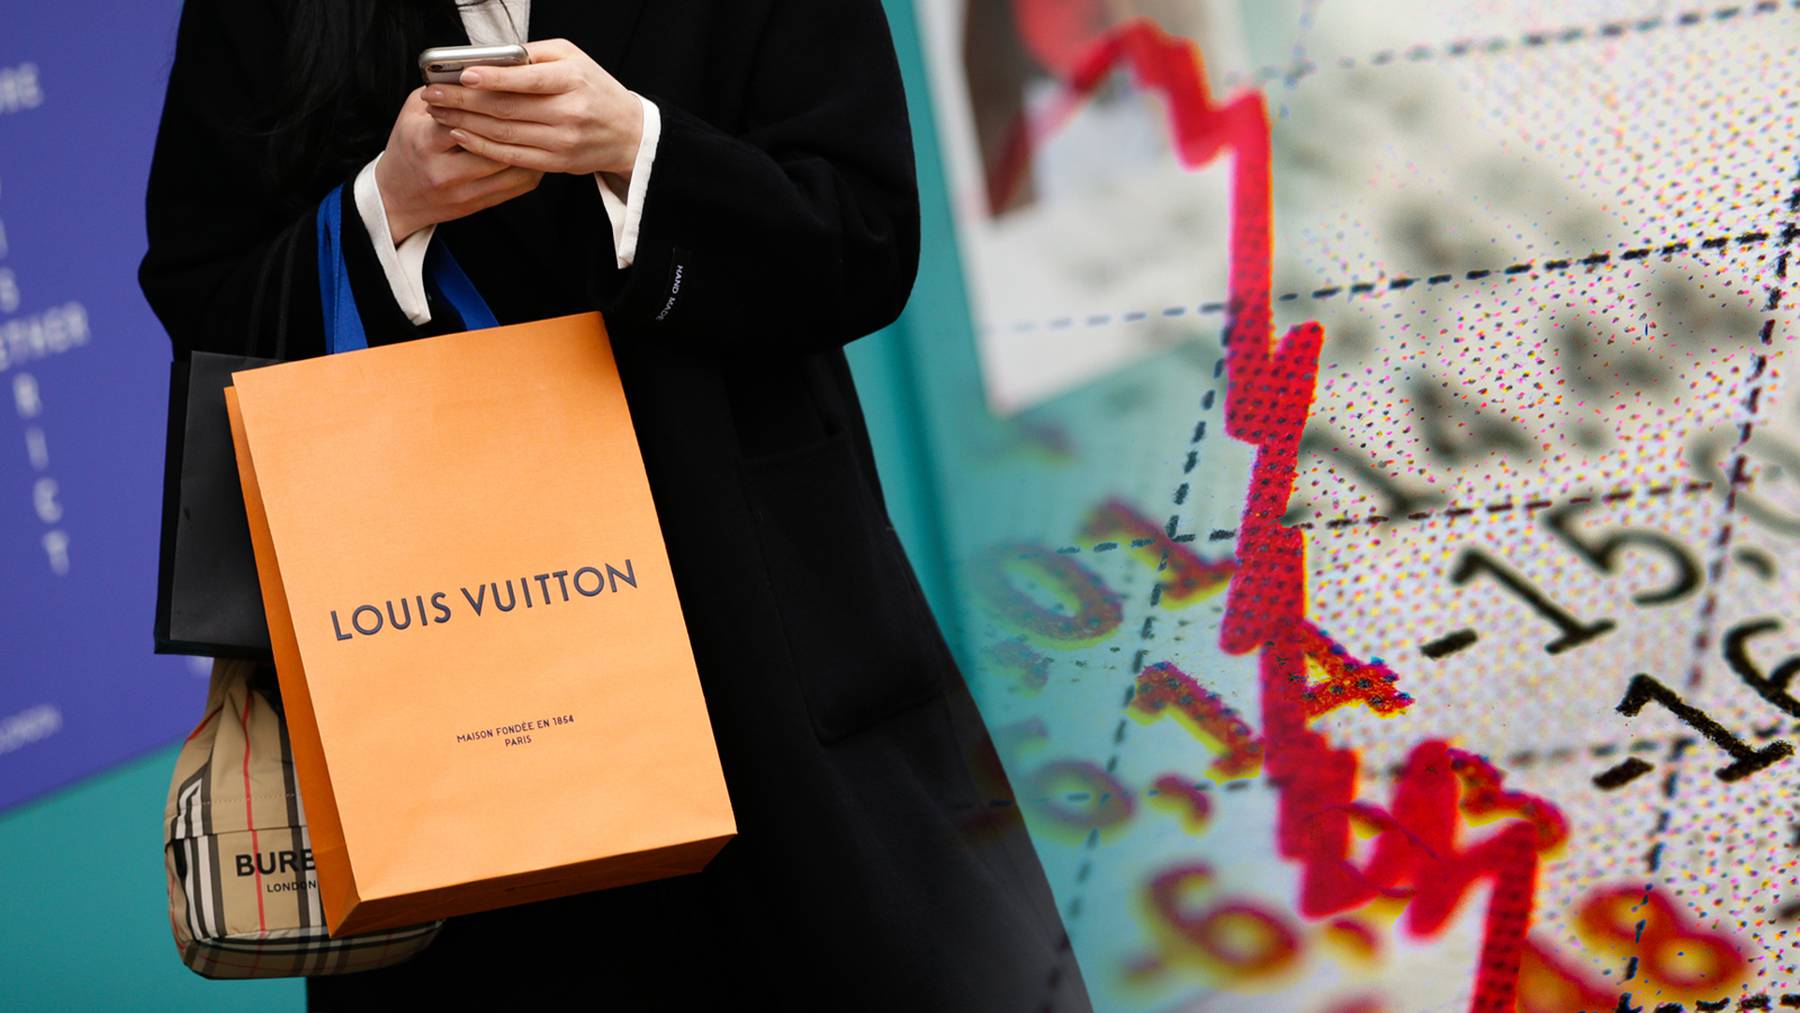 A luxury shopper holding a Louis Vuitton shopping bag and a Burberry pouch, next to an image of a declining stock market.